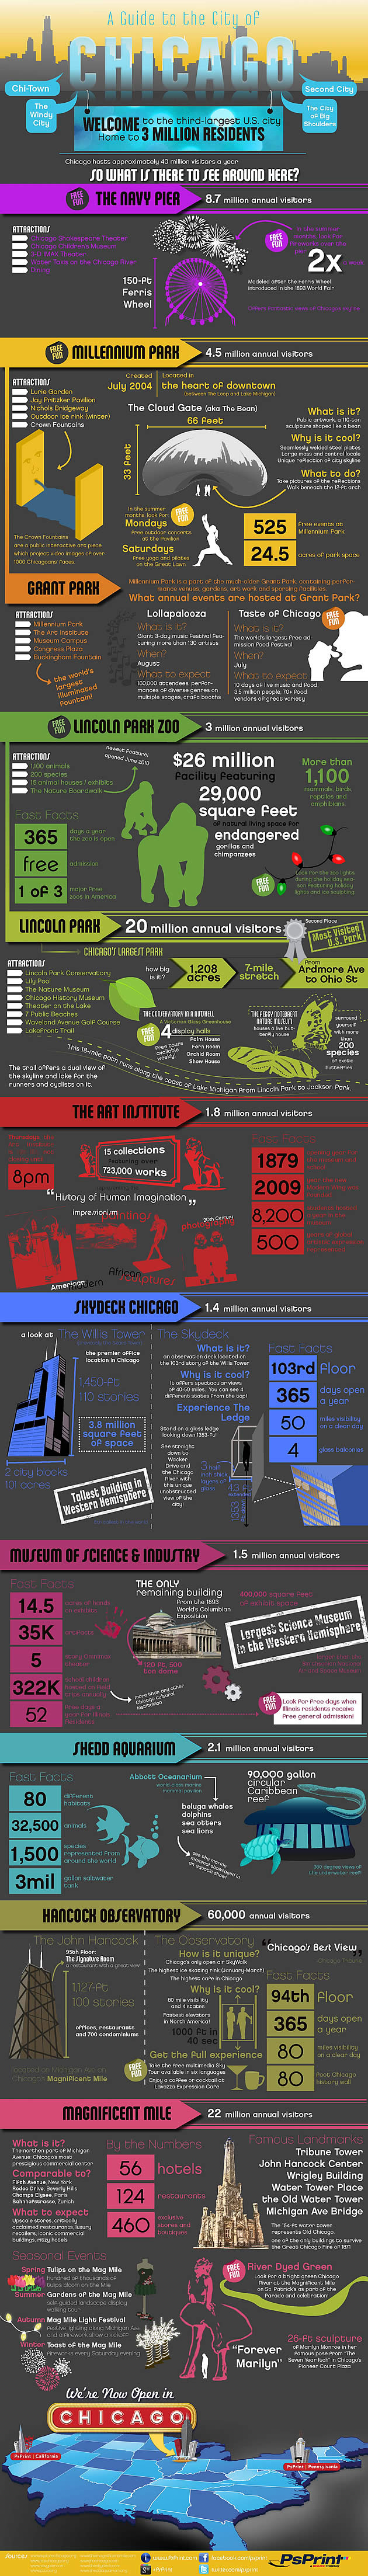 things to do in Chicago -by PsPrint